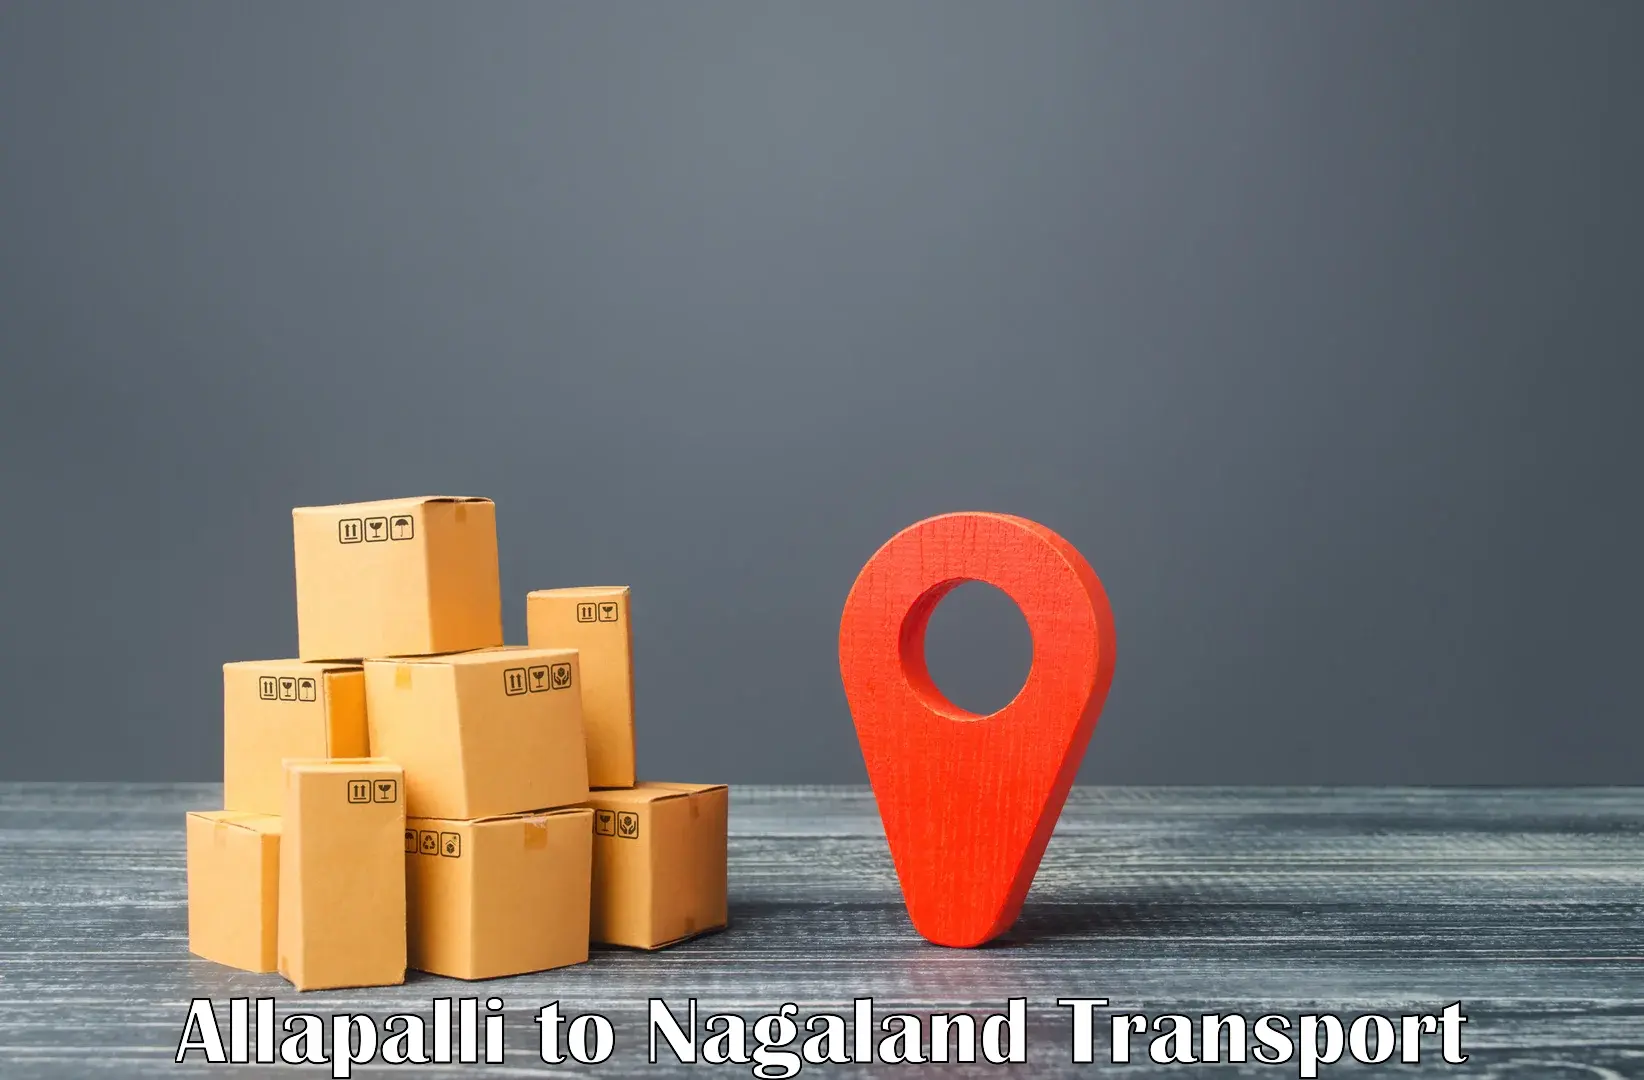 Commercial transport service Allapalli to Mokokchung